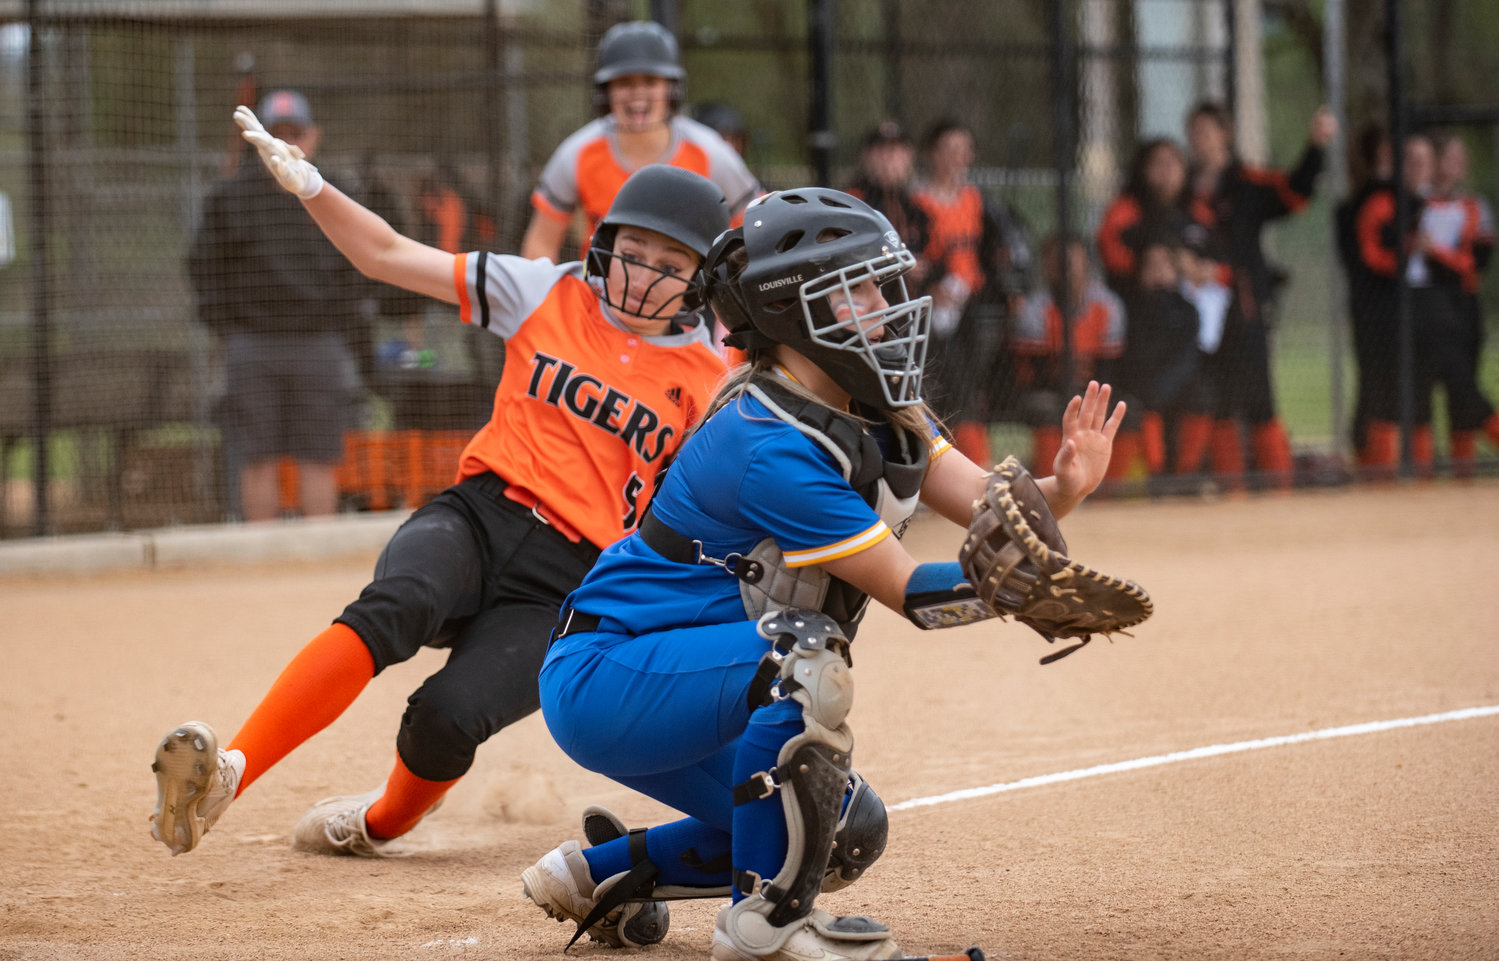 Centralia's Lauren Wasson slides safely into home plate on Friday.